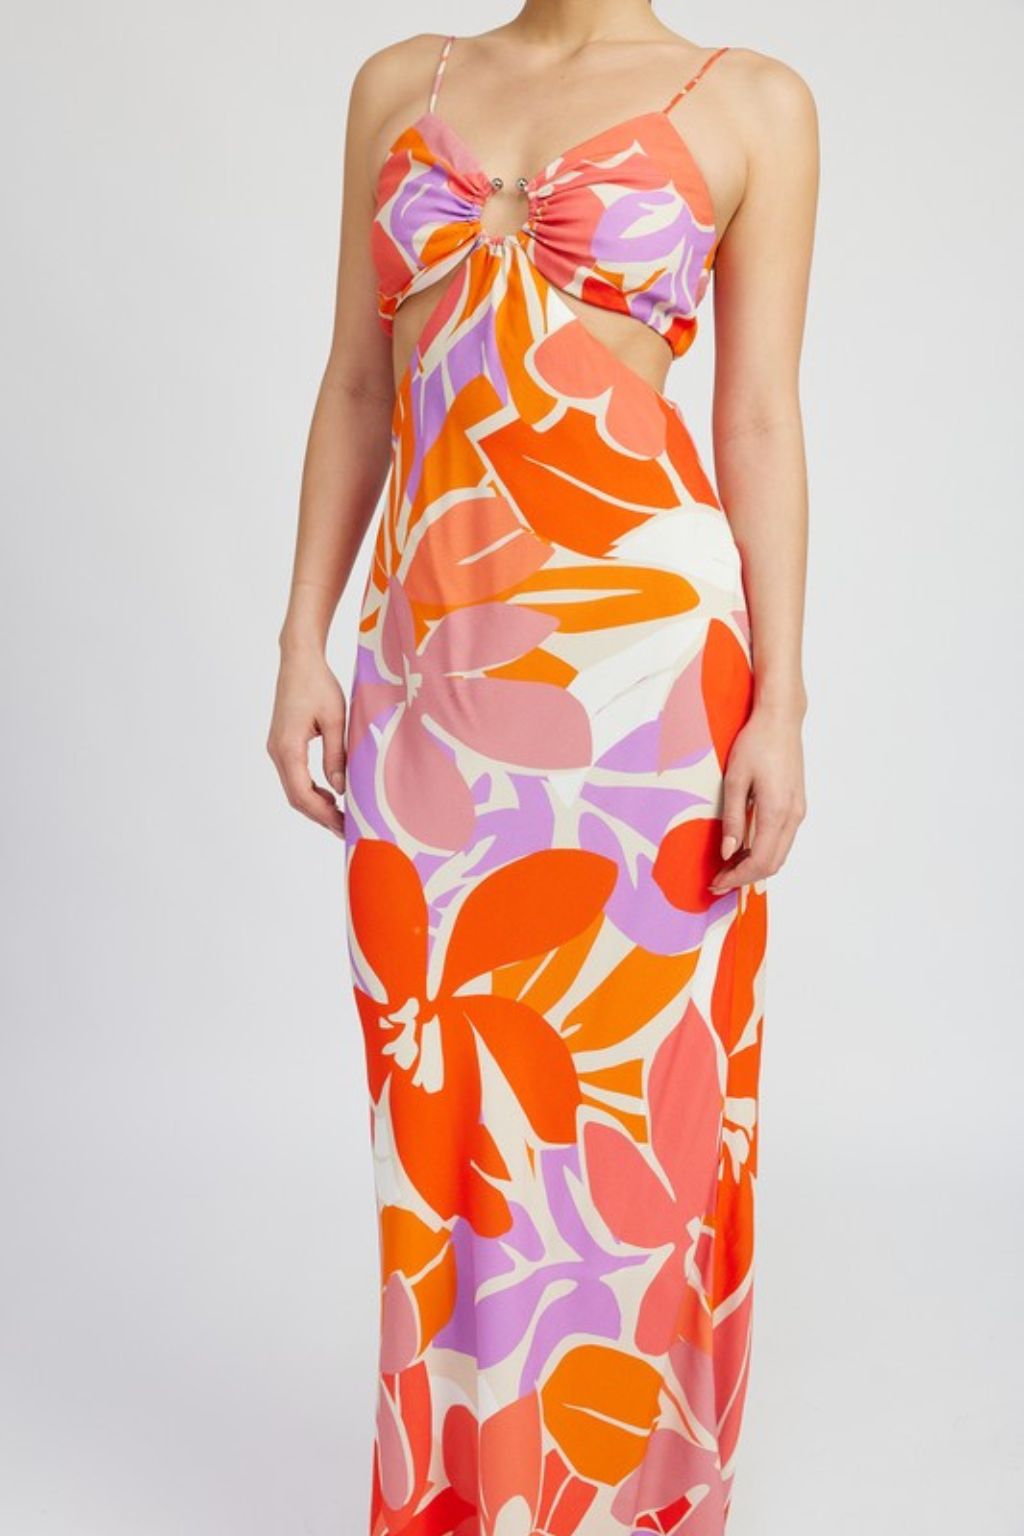 Floral O-Ring Detail Cut Out Maxi Dress